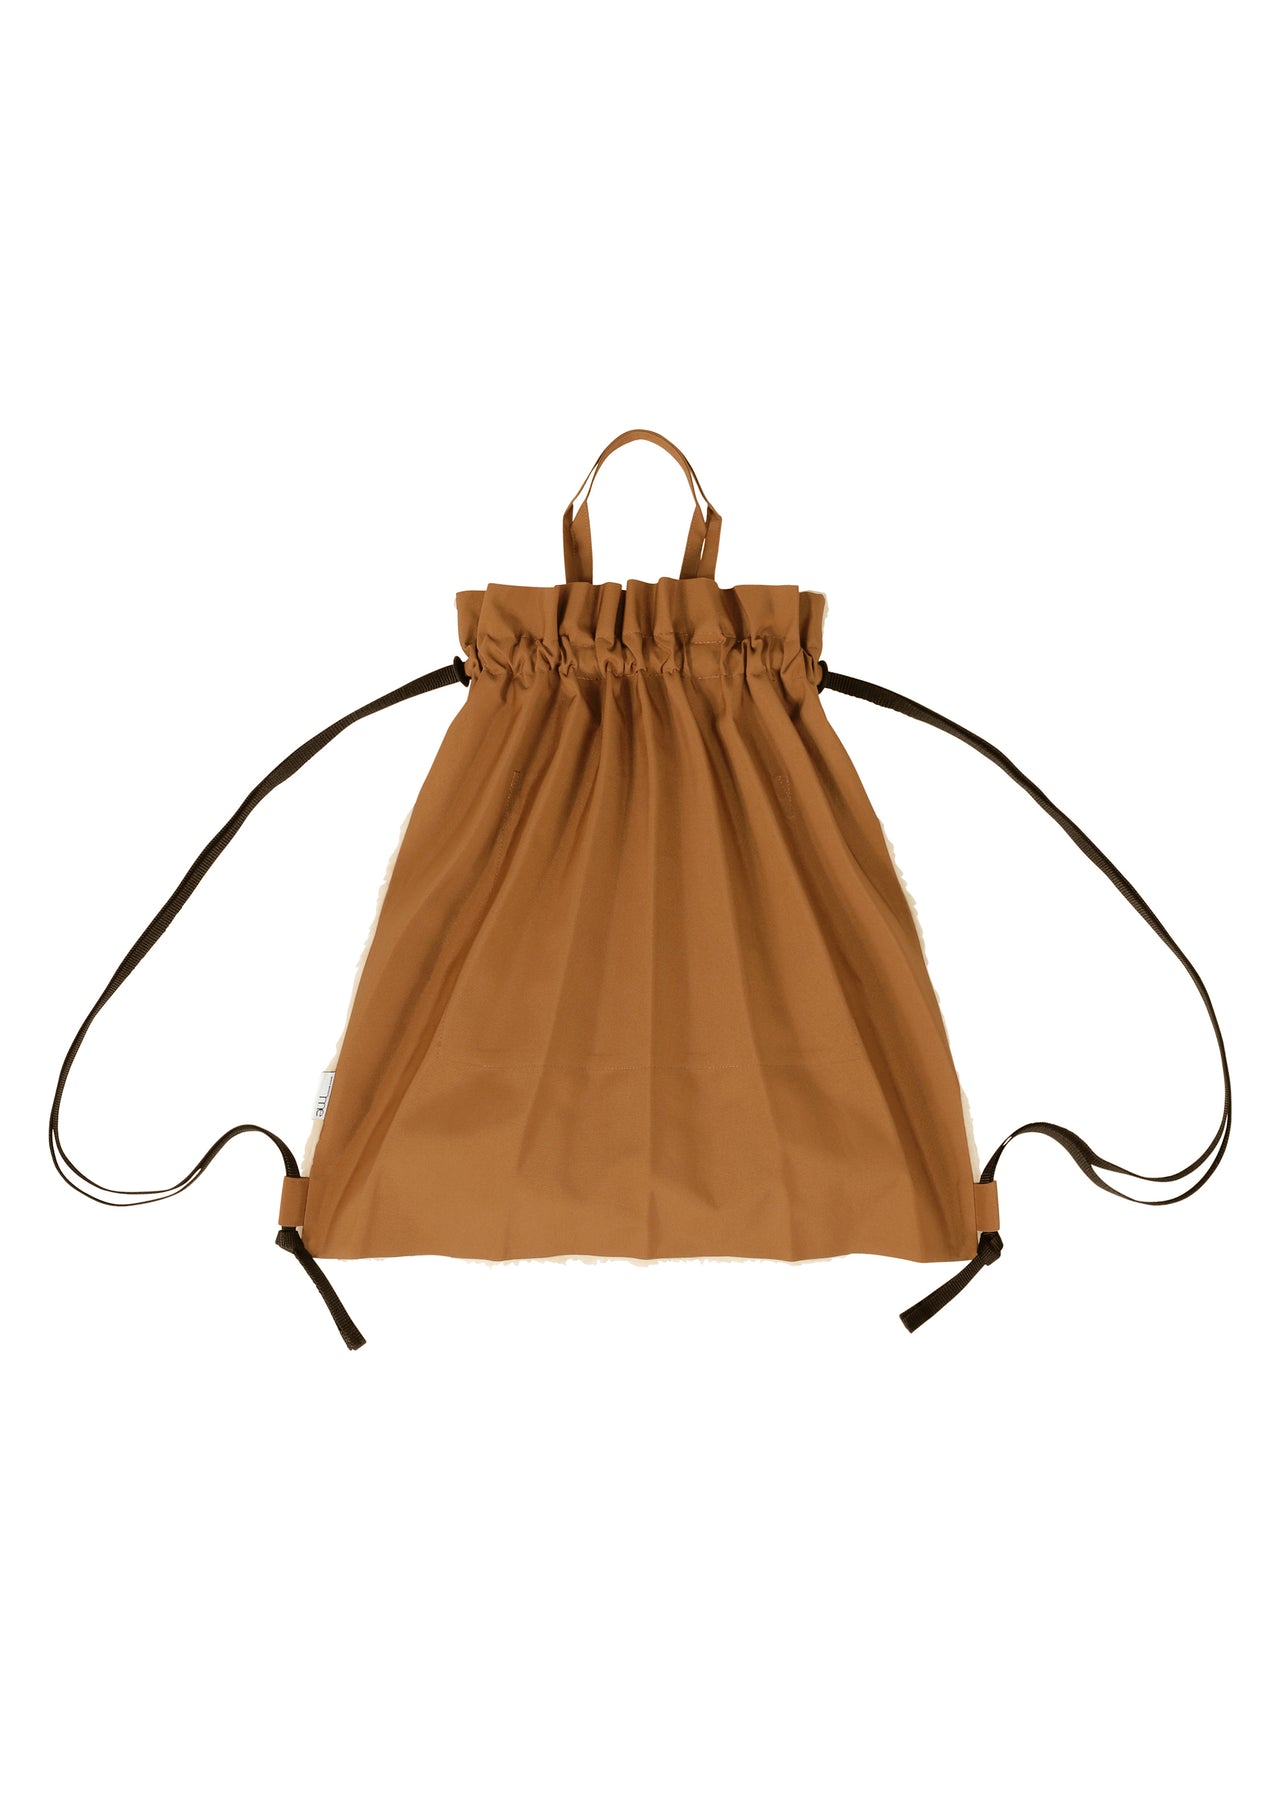 SHEEP PLEATS BAG | The official ISSEY MIYAKE ONLINE STORE | ISSEY ...